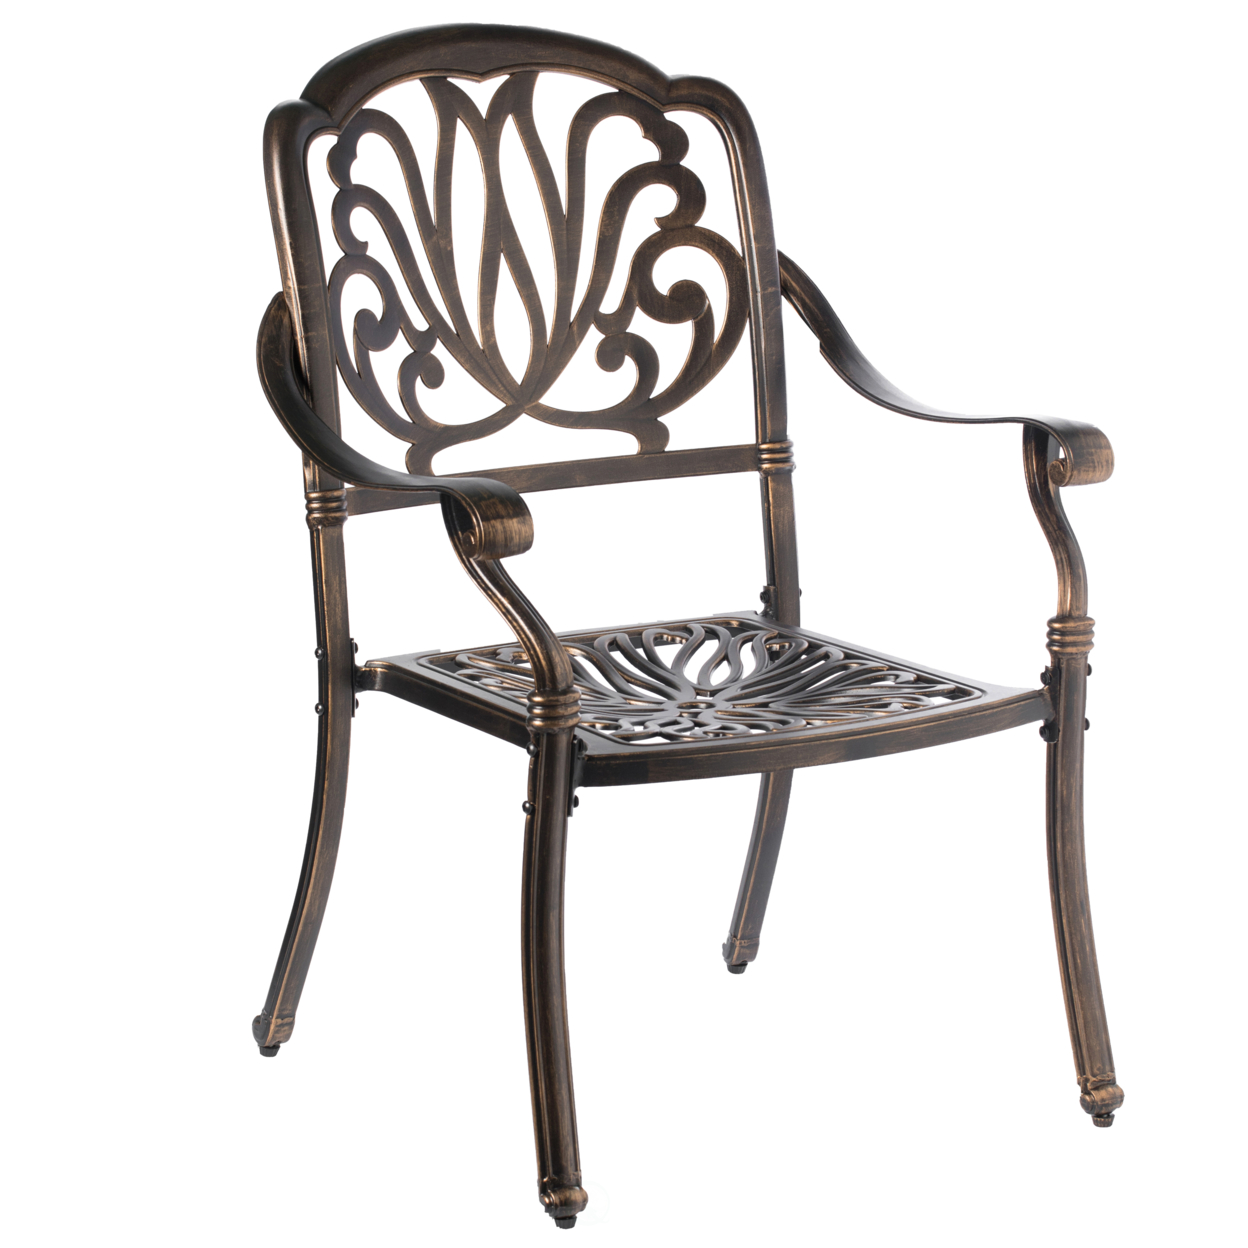 Gardenised Indoor and Outdoor Bronze Dinning Set 4 Chairs with 1 Table Bistro Patio Cast Aluminum.